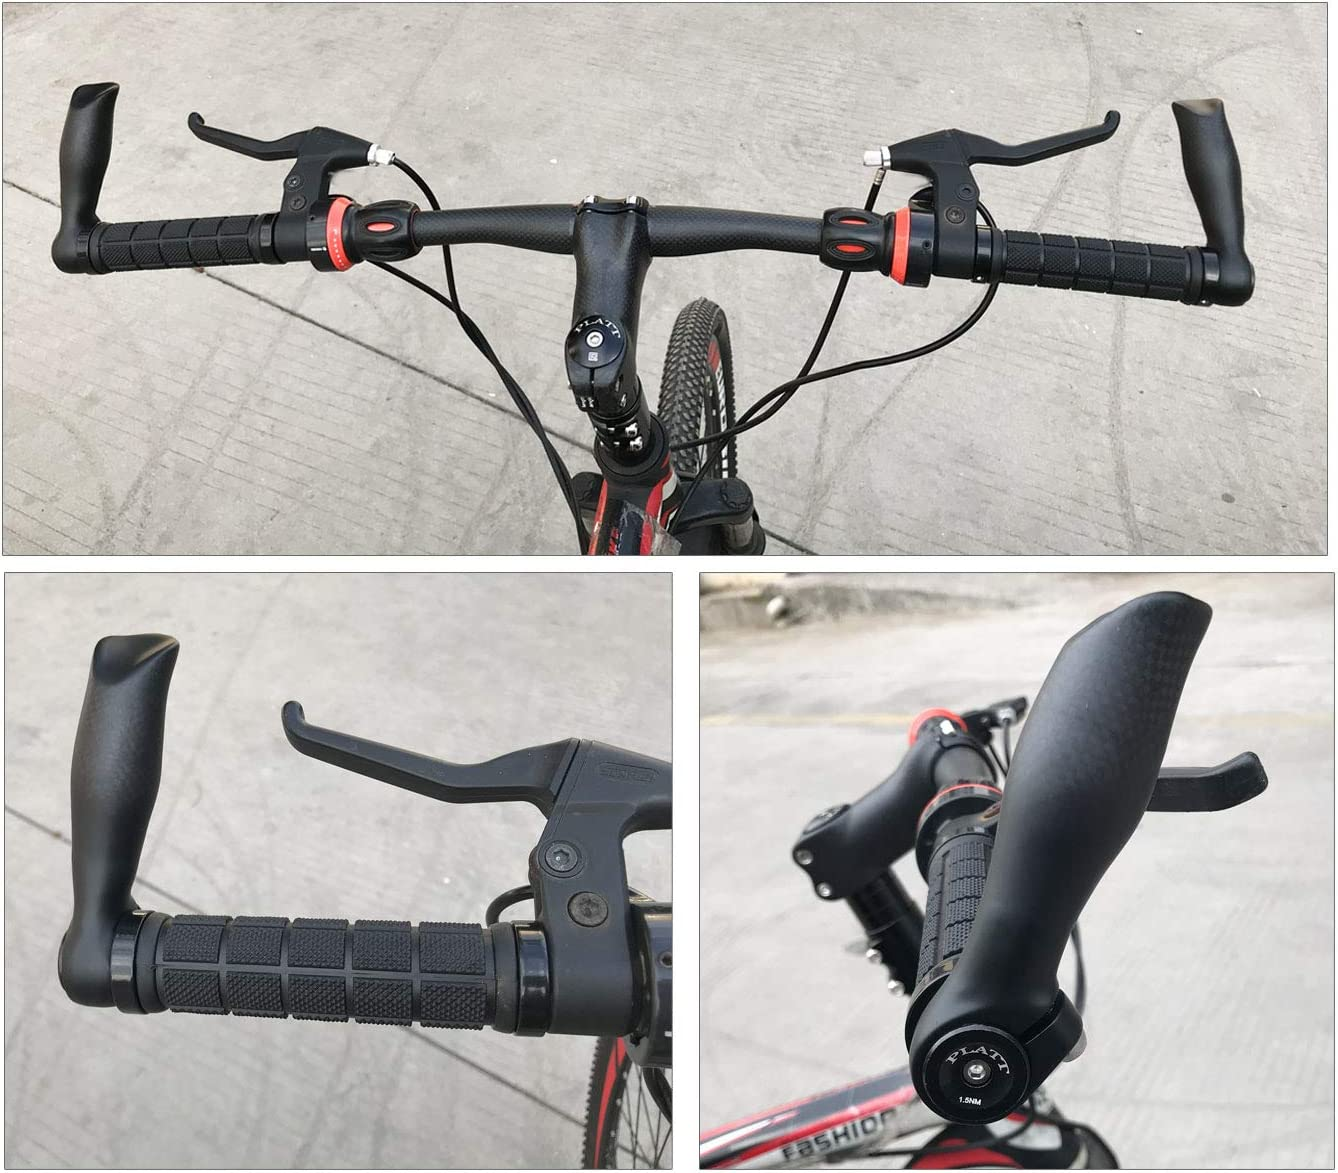 Install handlebar extenders so that you can change up your hand positions to relieve aching muscles on long rides.